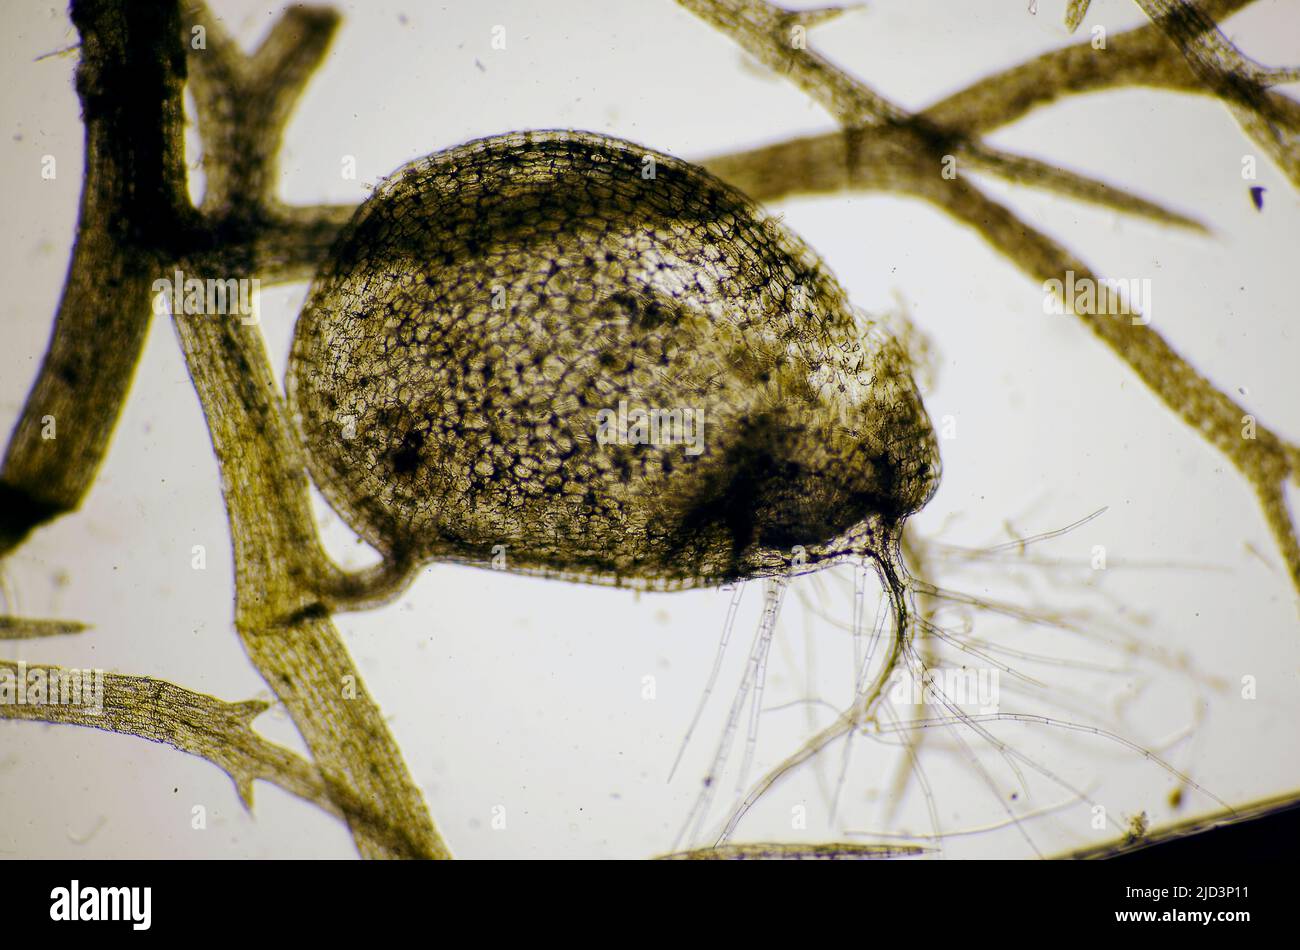 Bladder-like trap of the angiosperm Bladderworts, Utricularia sp.  The bladder is about 0,3 x 0,2 mm across. 40X at the film plane. From south-western Stock Photo